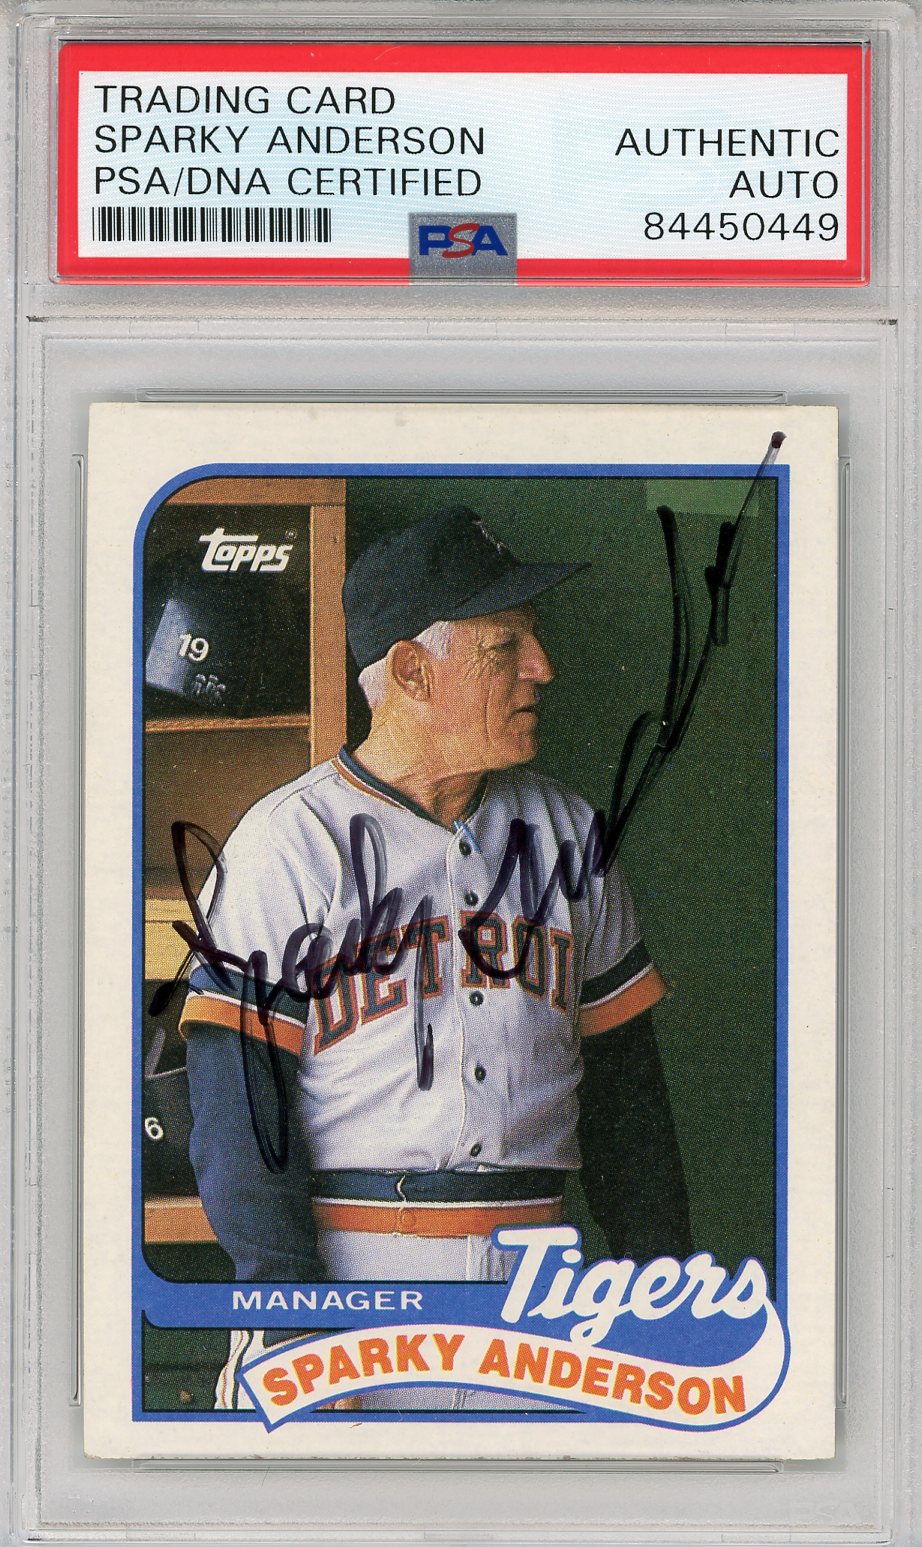 Sparky Anderson - Trading/Sports Card Signed